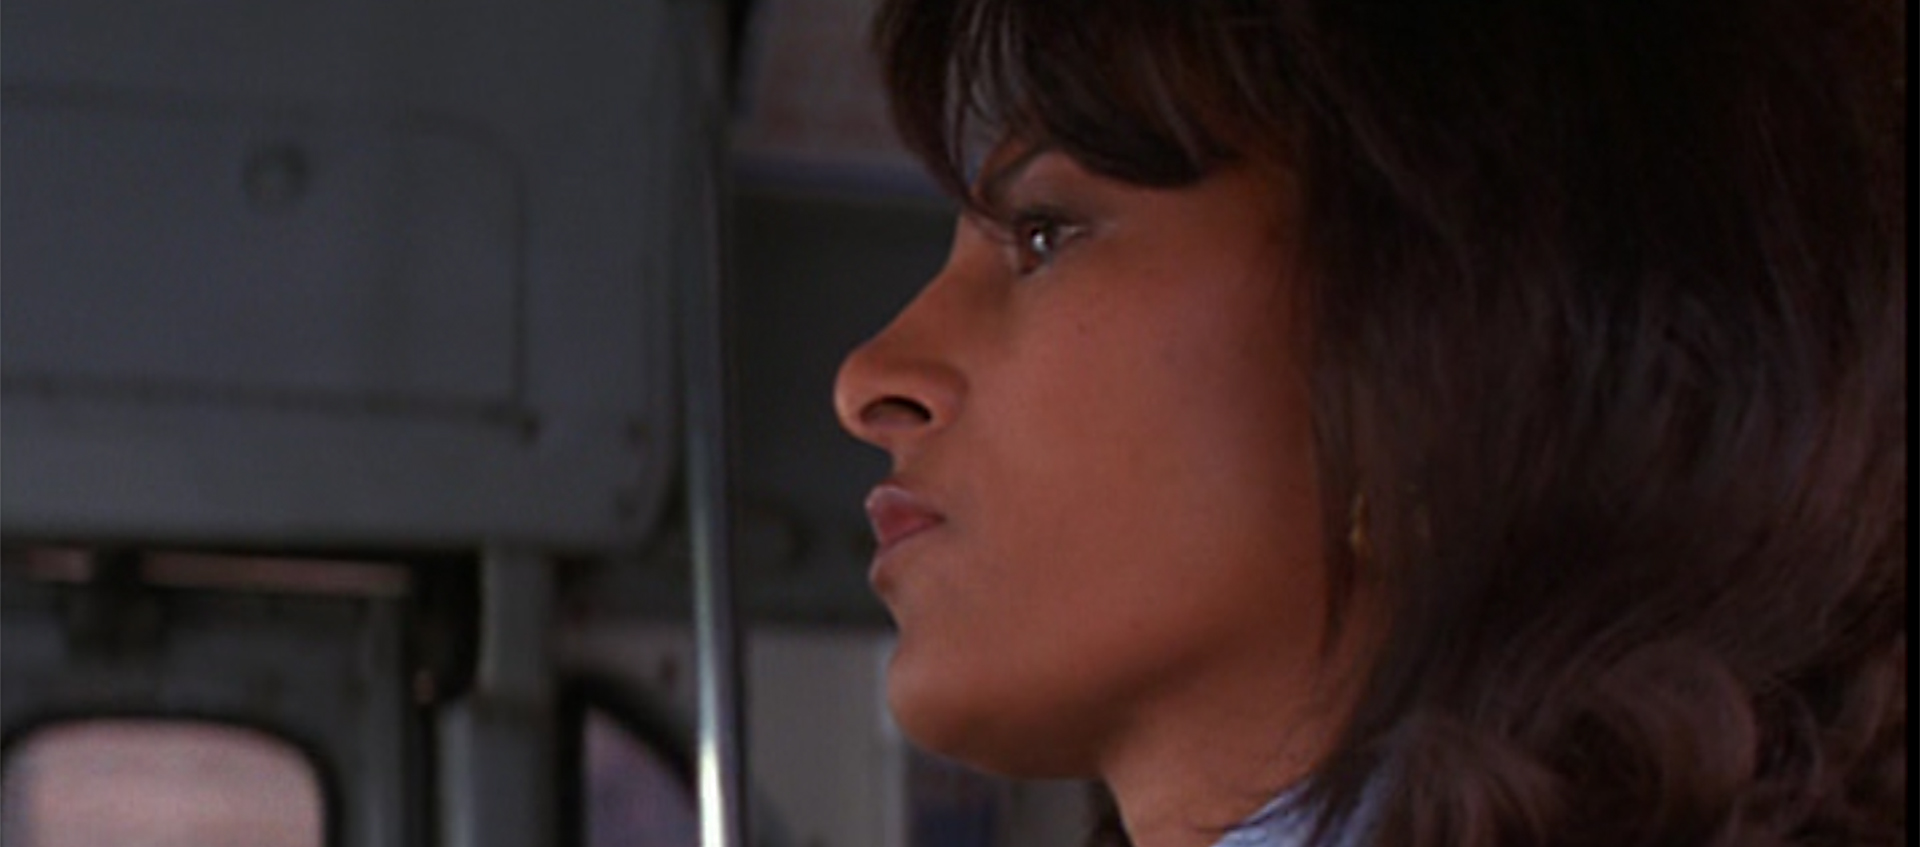 Pam Grier in profile, in close-up. Her dark hair is over her shoulders.